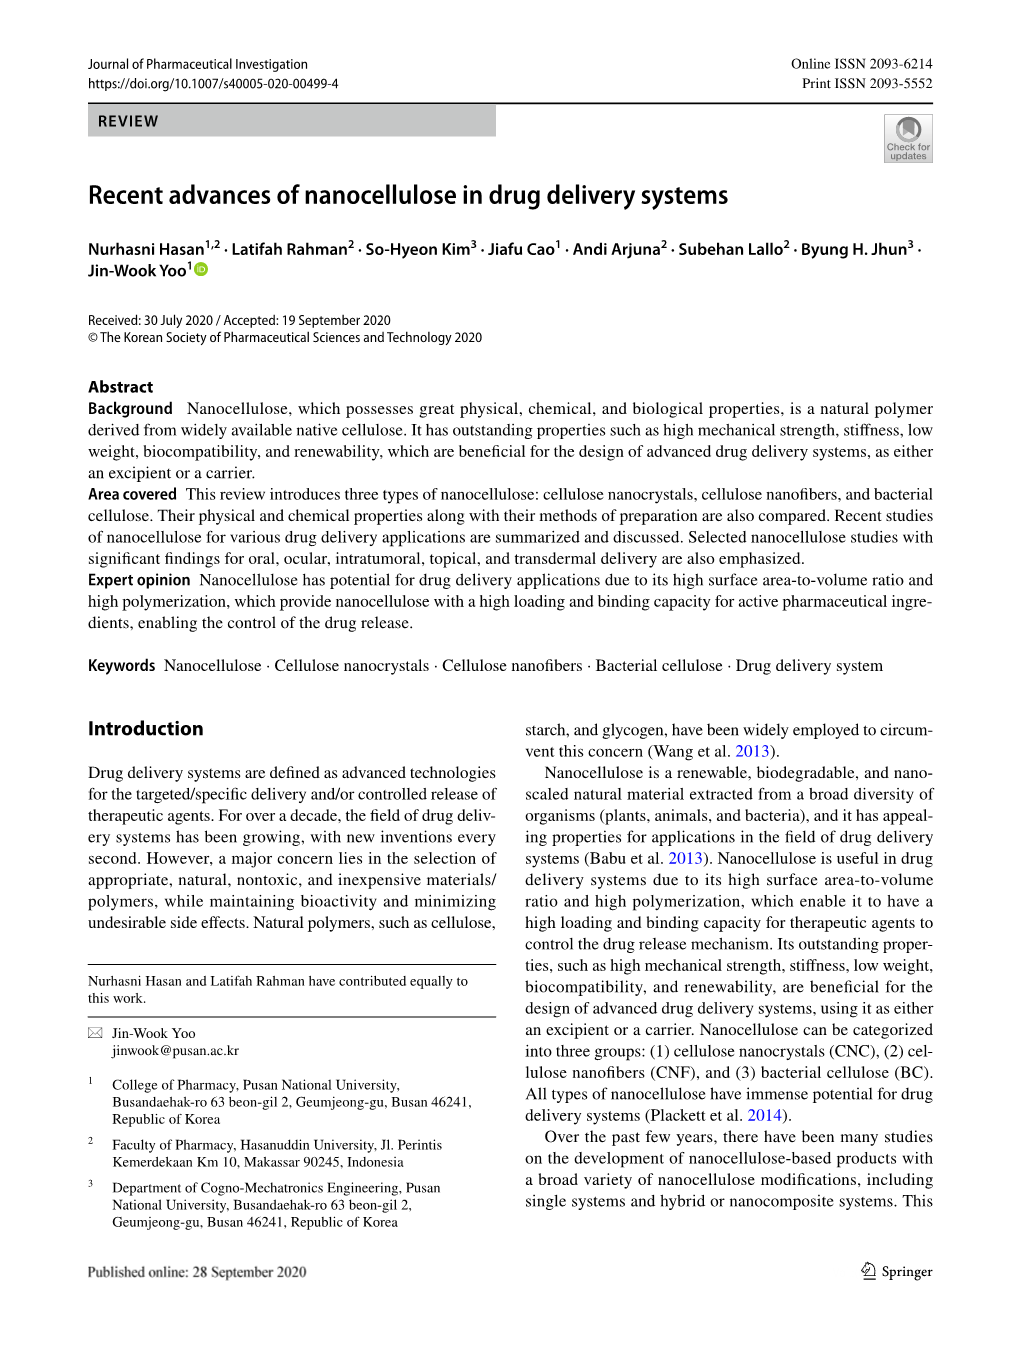 Recent Advances of Nanocellulose in Drug Delivery Systems